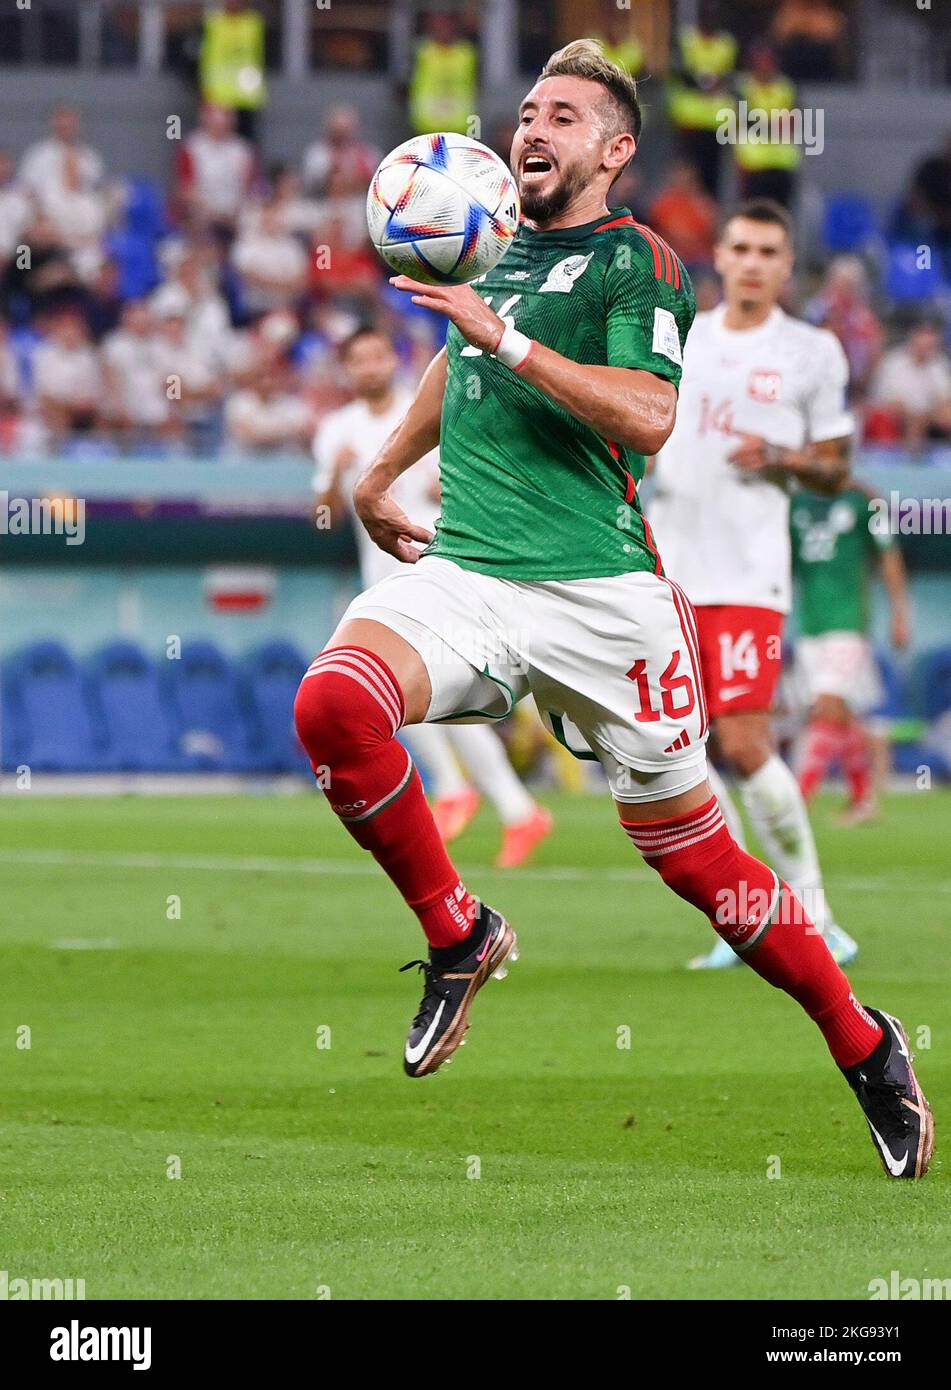 Doha, Qatar. 22nd Nov, 2022. Hector Herrera of Mexico competes during the Group C match between Mexico and Poland of the 2022 FIFA World Cup at Ras Abu Aboud (974) Stadium in Doha, Qatar, Nov. 22, 2022. Credit: Chen Cheng/Xinhua/Alamy Live News Stock Photo